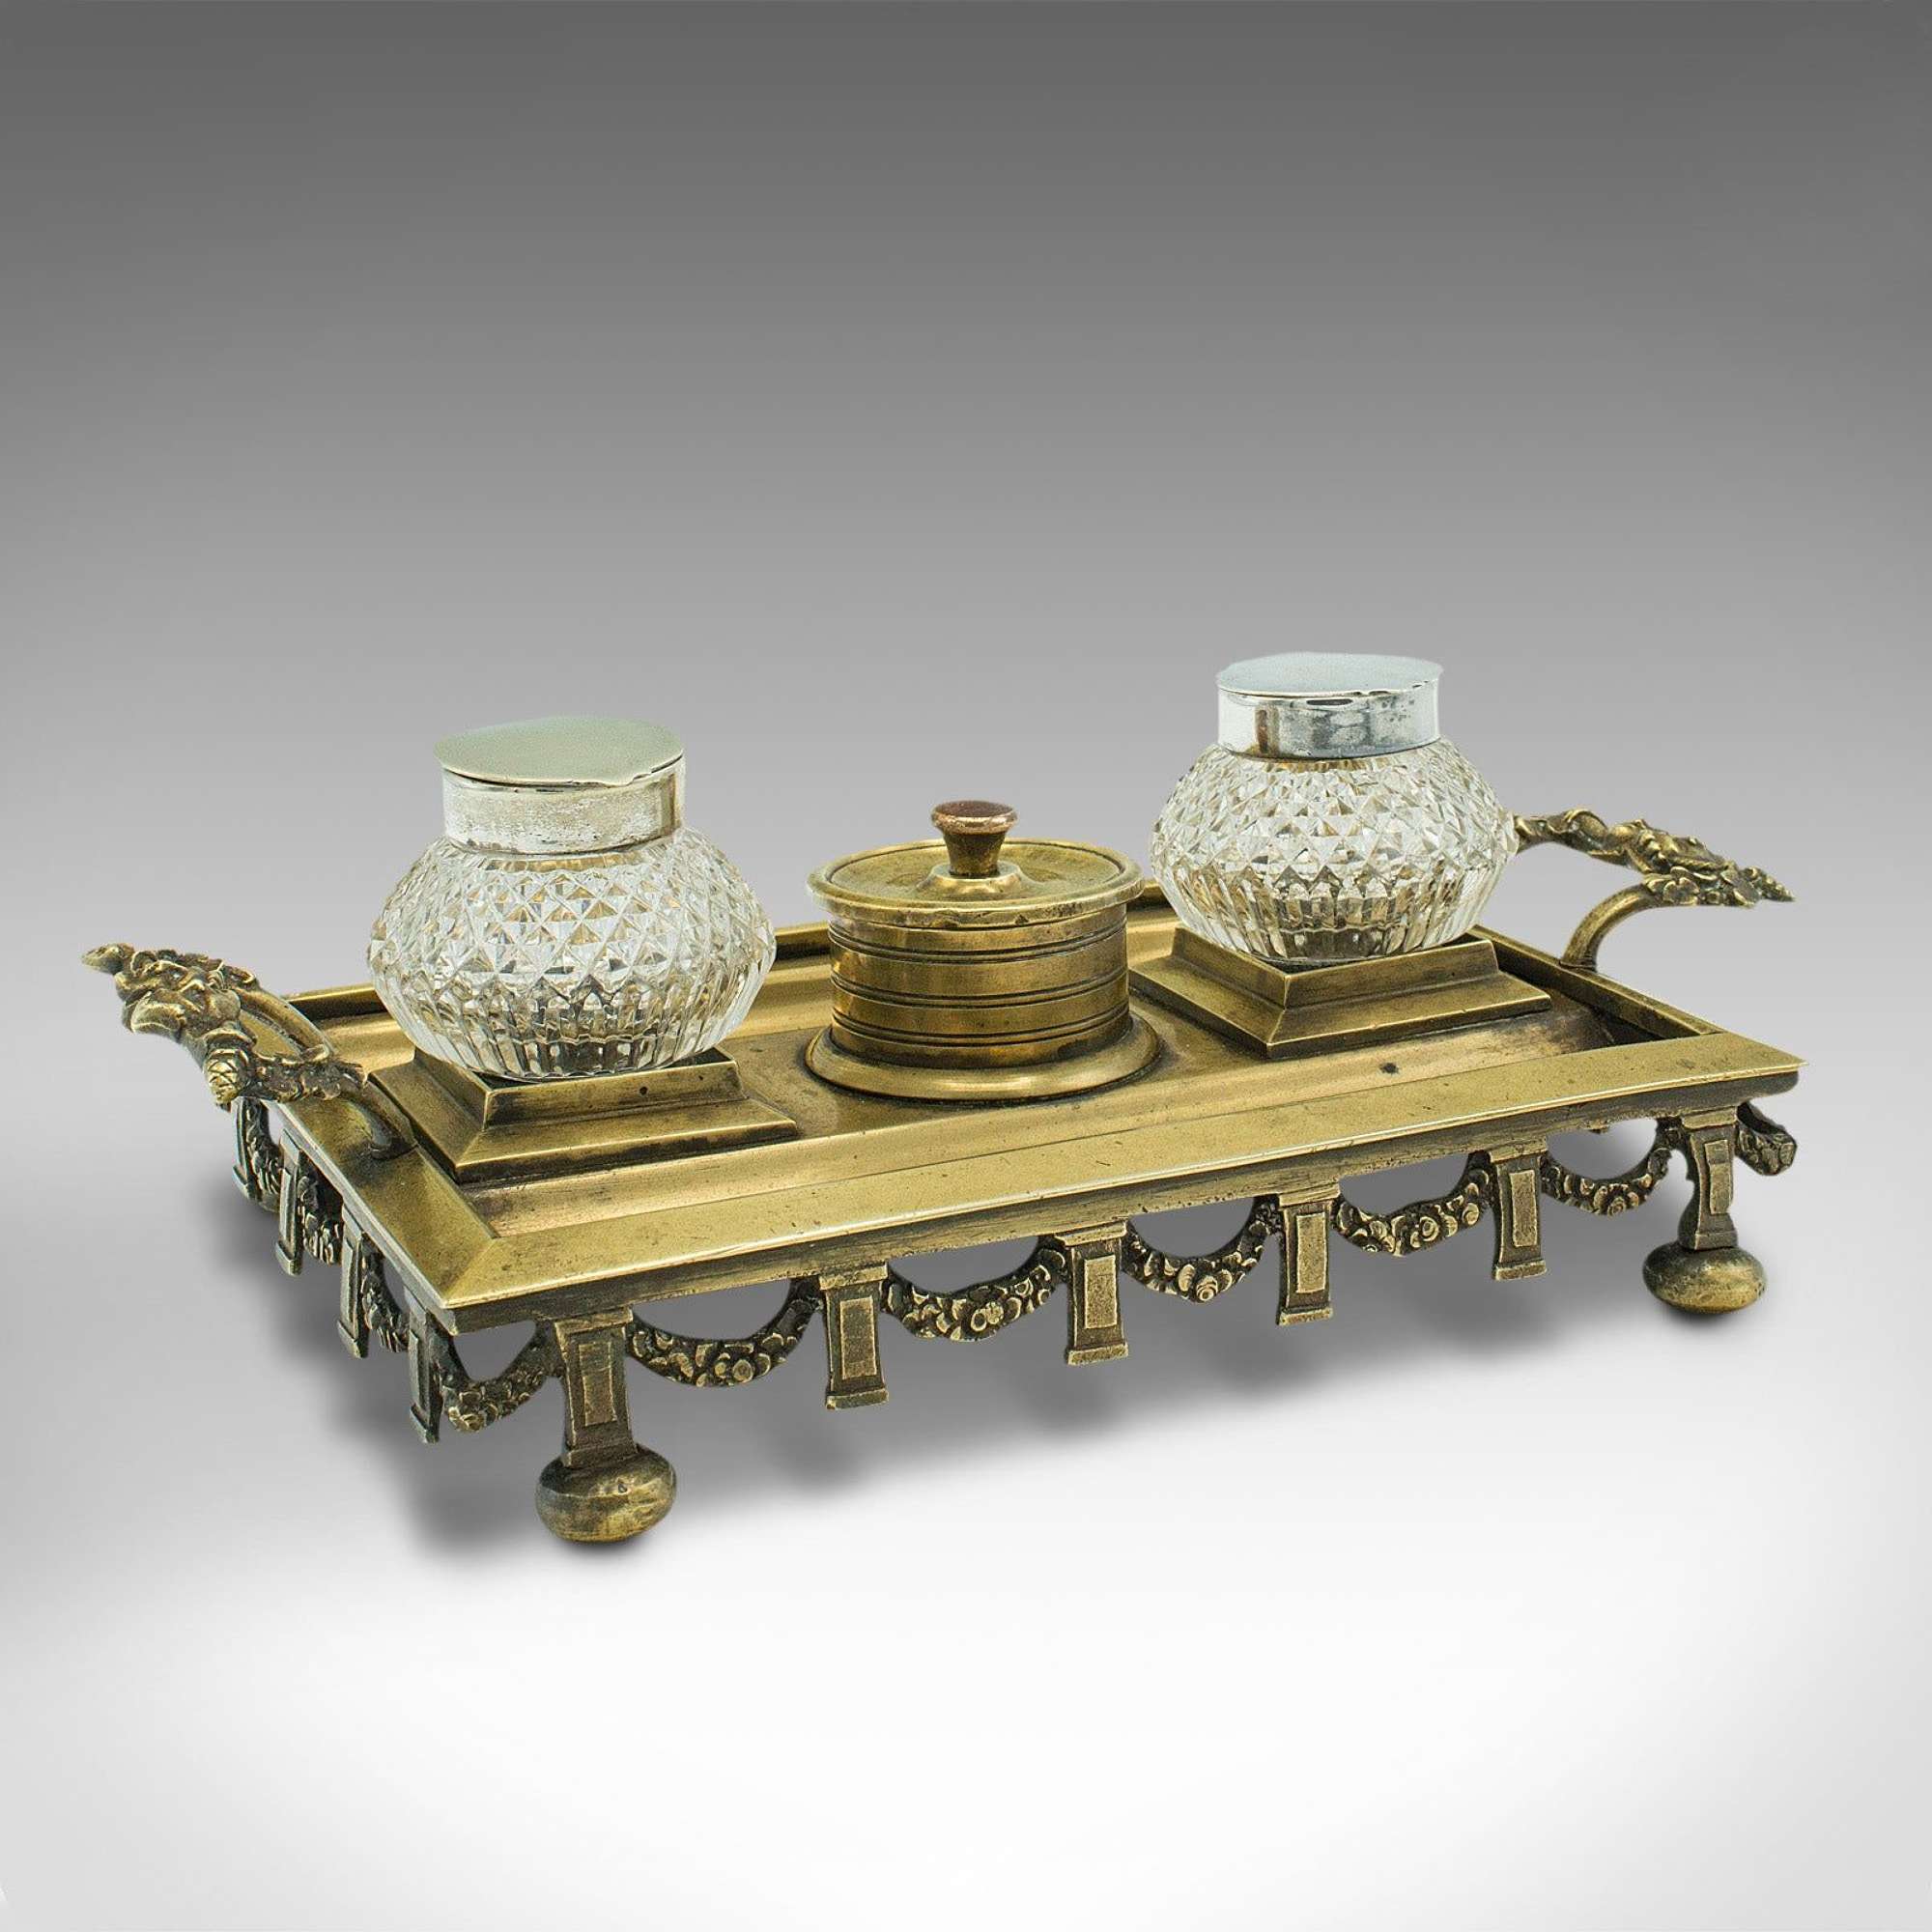 Antique Pen Tray, English, Brass, Silver Plate, Inkwell Stand, Edwardian, C.1910